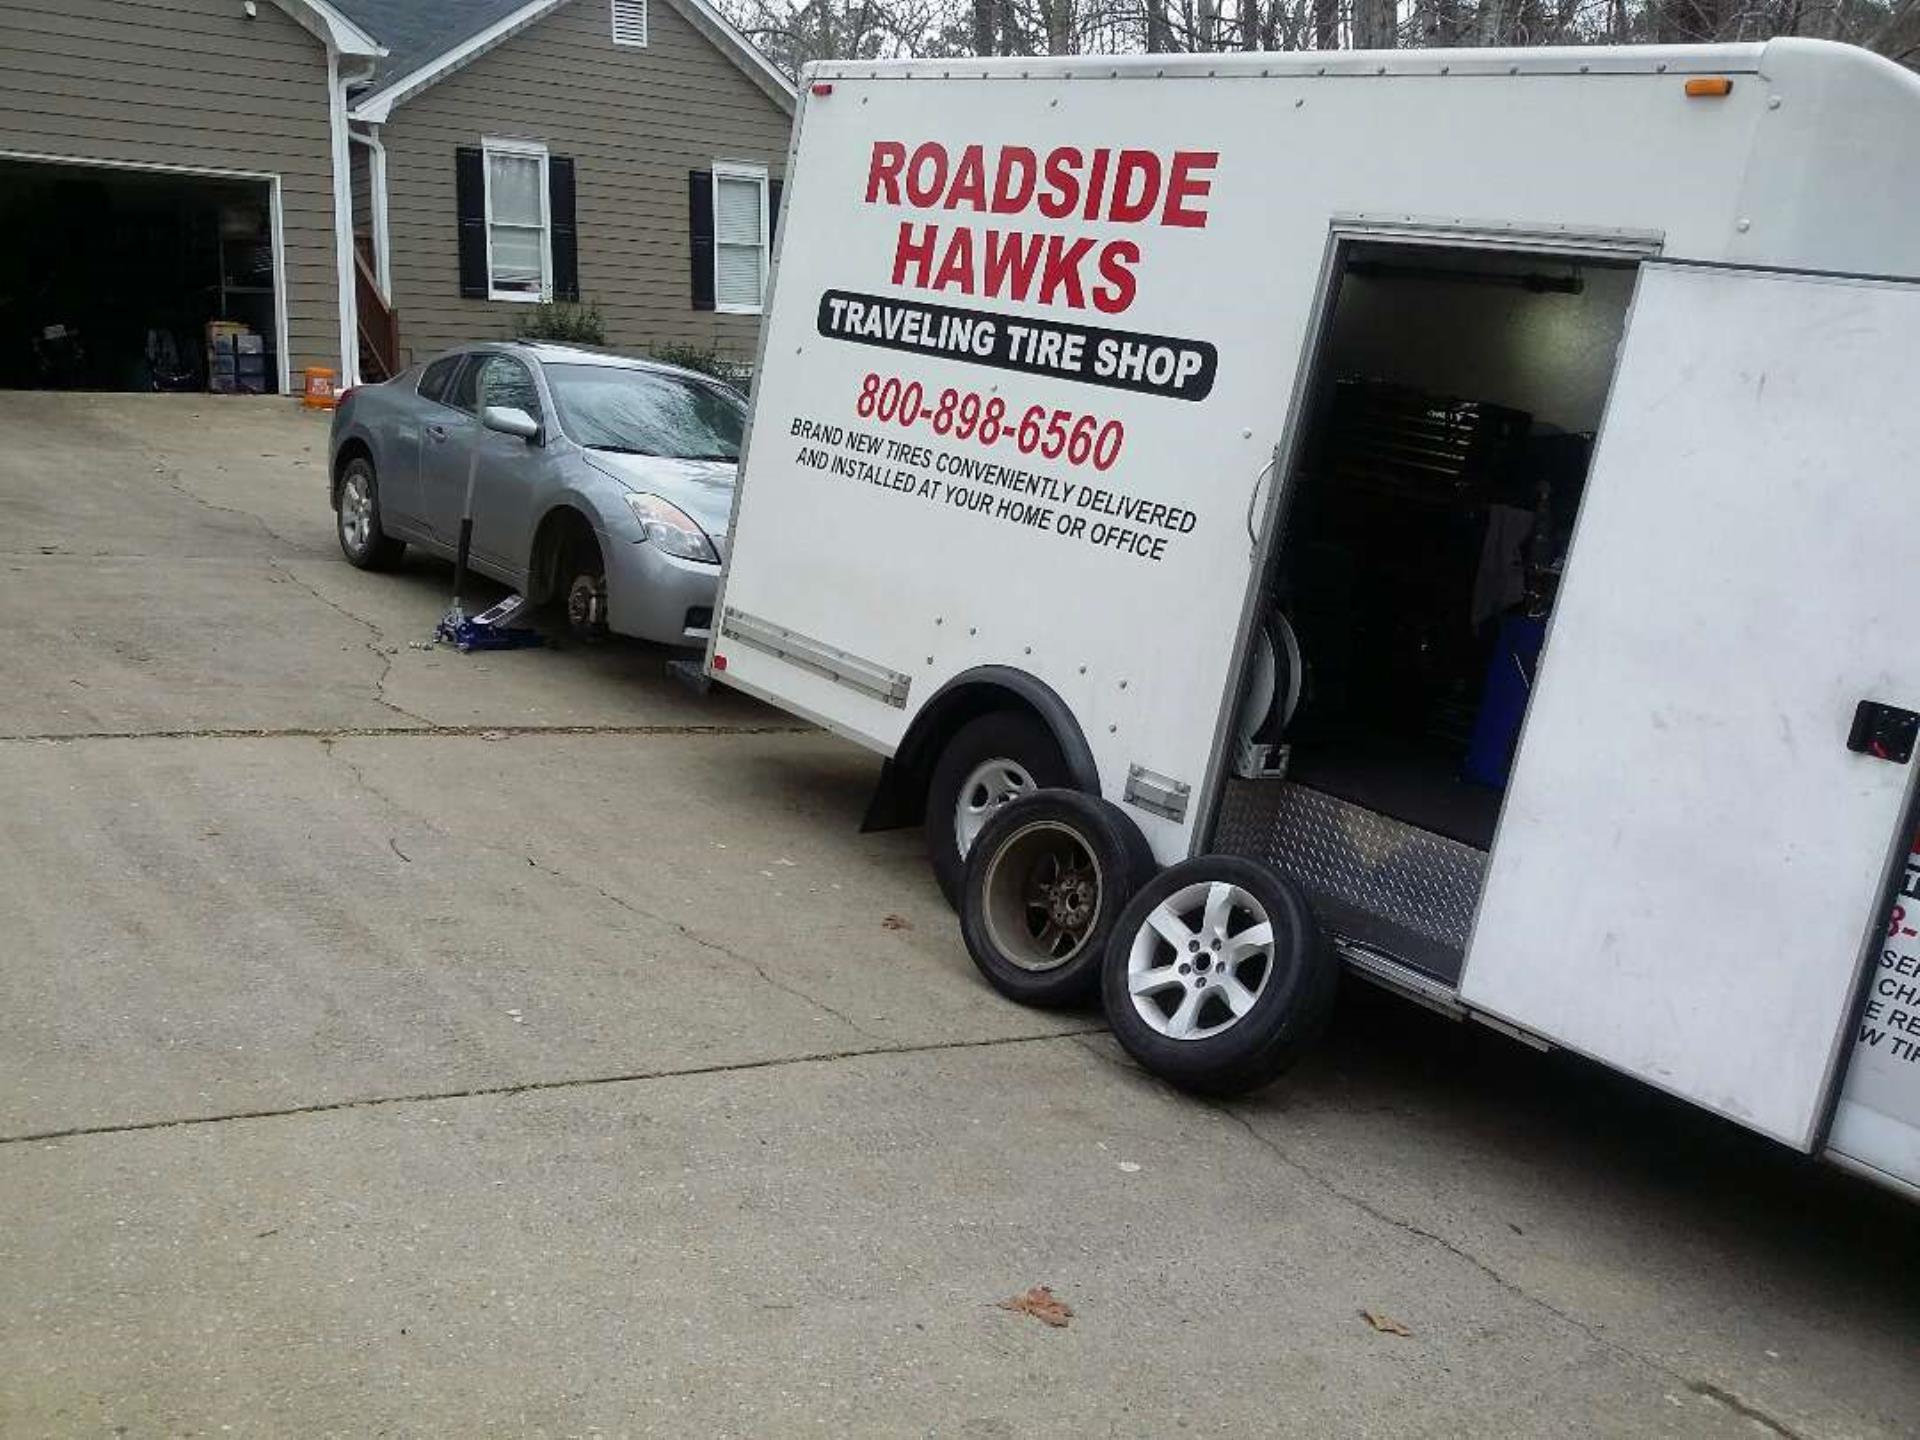 24 Hour Roadside Hawks Traveling Tire Shop Atlanta - Brand New Tires Delivered and Installed On The Side Of The Road. Mobile Tire Installation includes mounting and speed balancing onsite at your breakdown location - (404) 478-7887 for Roadside Assistance in Atlanta.